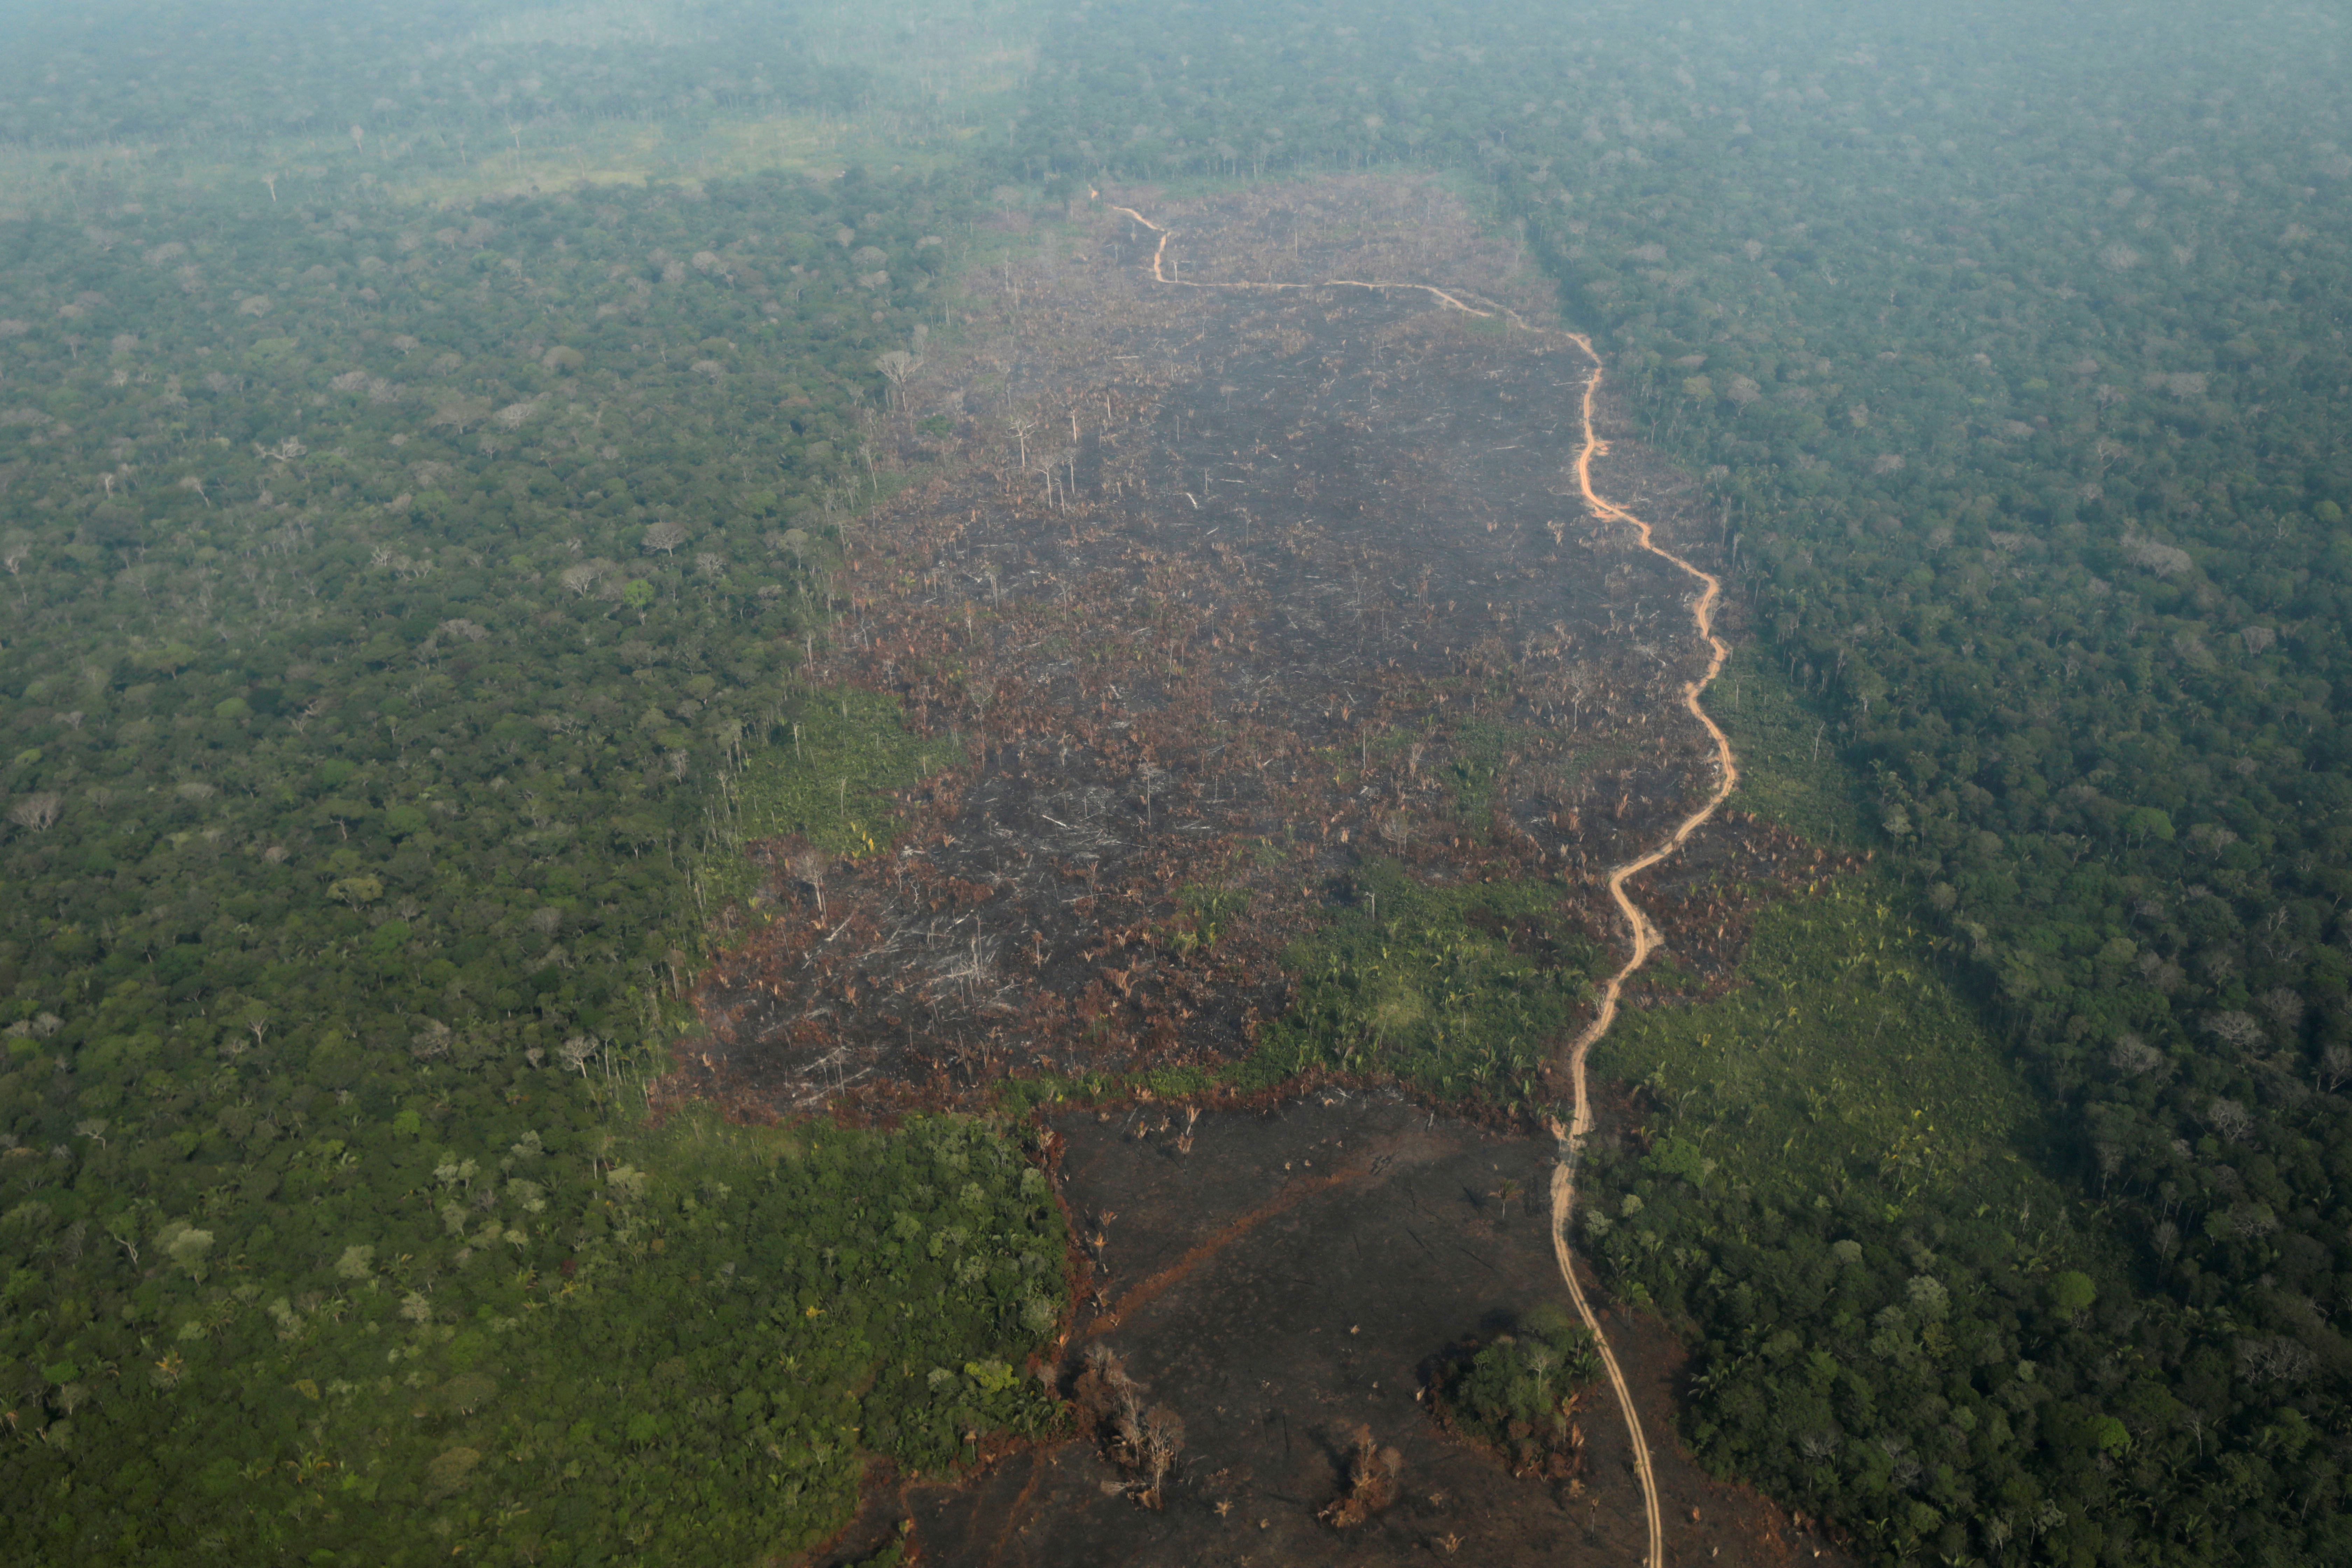 An aerial view of a deforested plot of the Amazon near Humaita, Amazonas State, Brazil